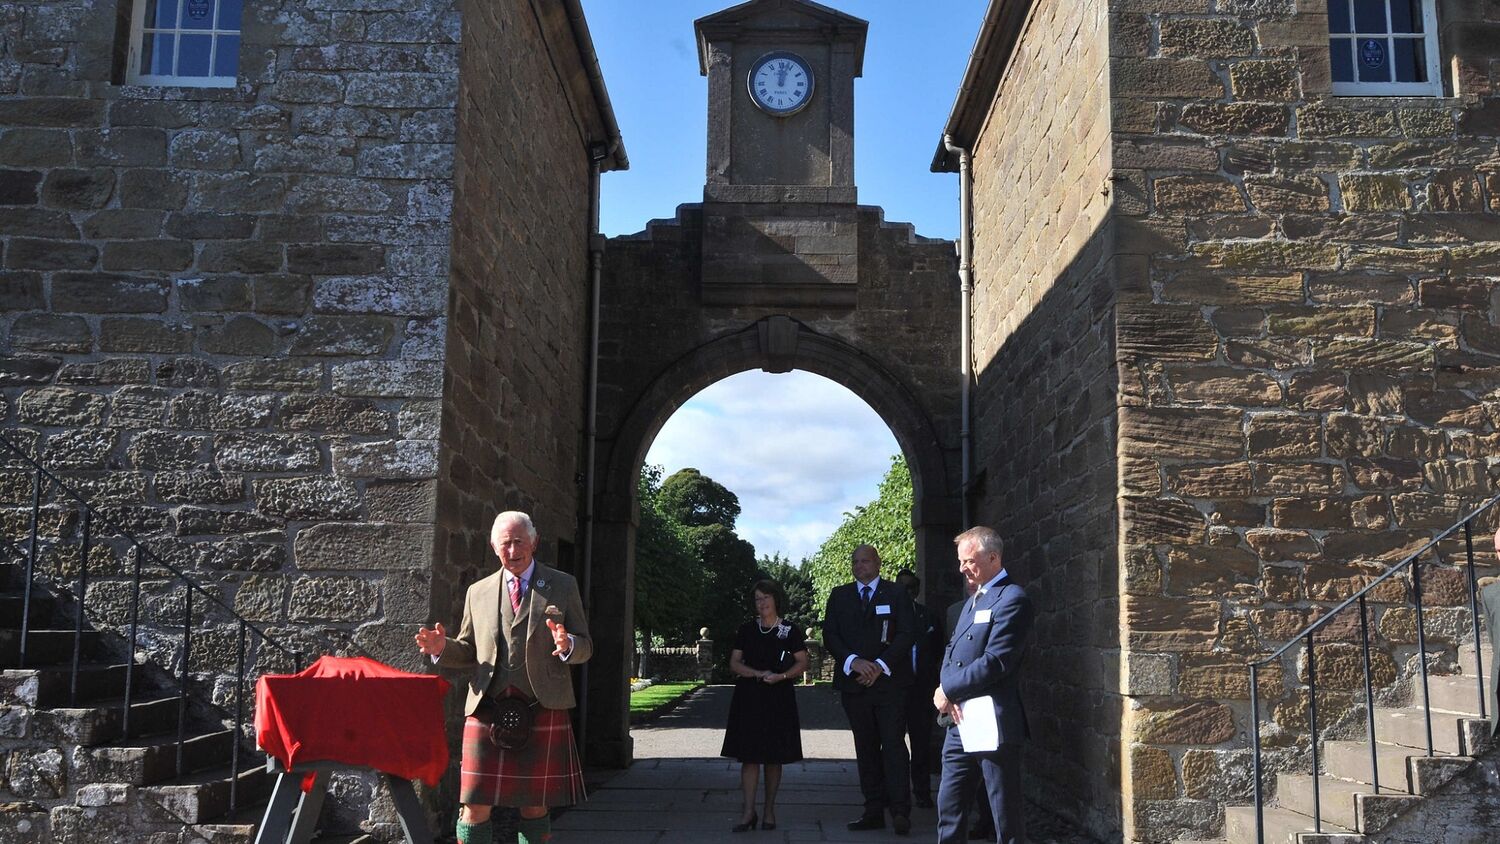 Prince Charles and some other smartly dressed officials stand in a courtyard beside some stone steps. Prince Charles stands beside a plaque covered by a red sheet.